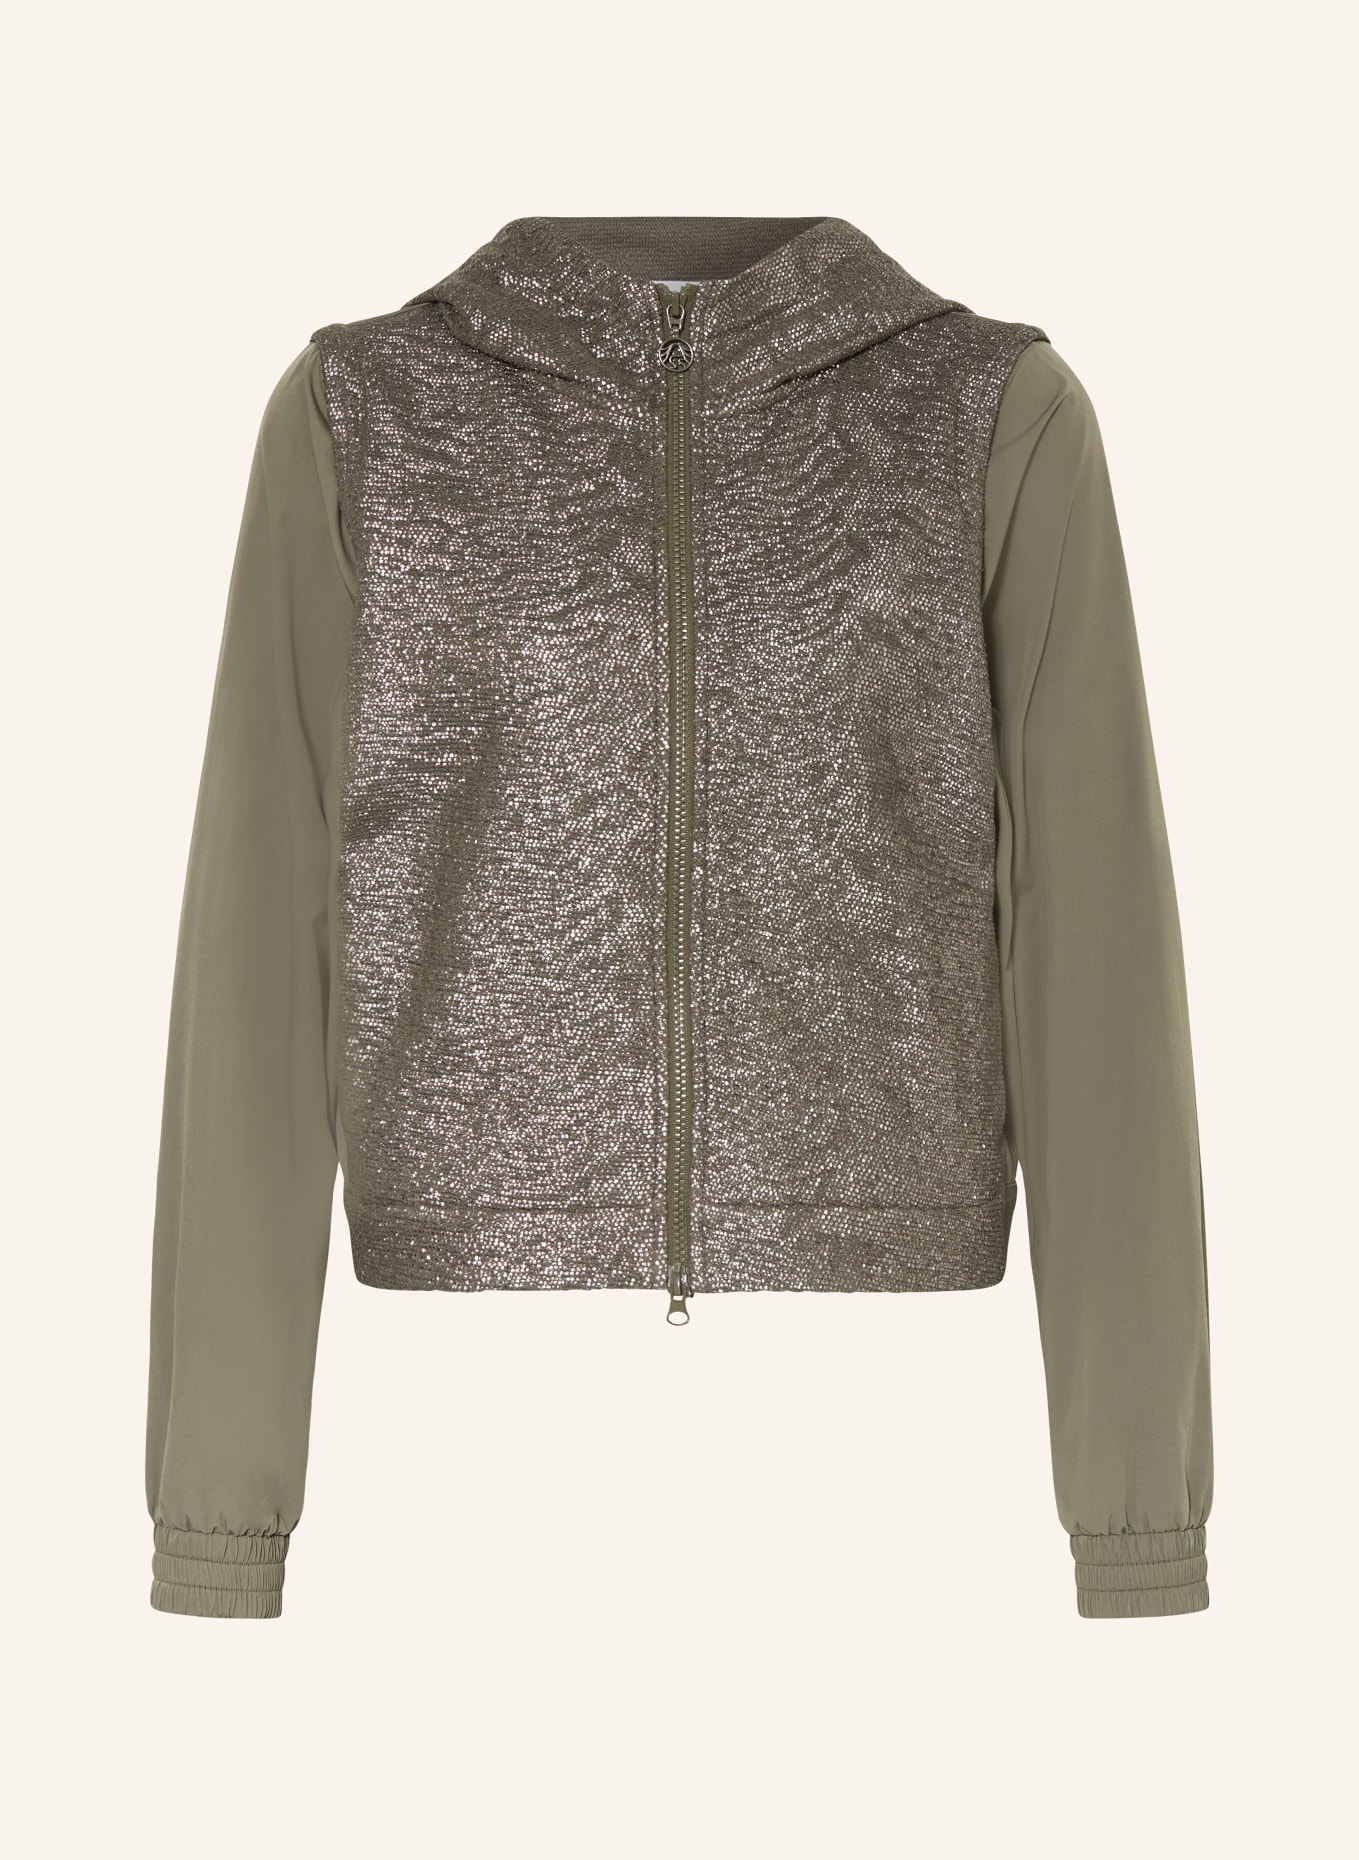 ULLI EHRLICH SPORTALM 2-in-1 Bomber jacket in mixed materials, Color: KHAKI/ SILVER (Image 1)